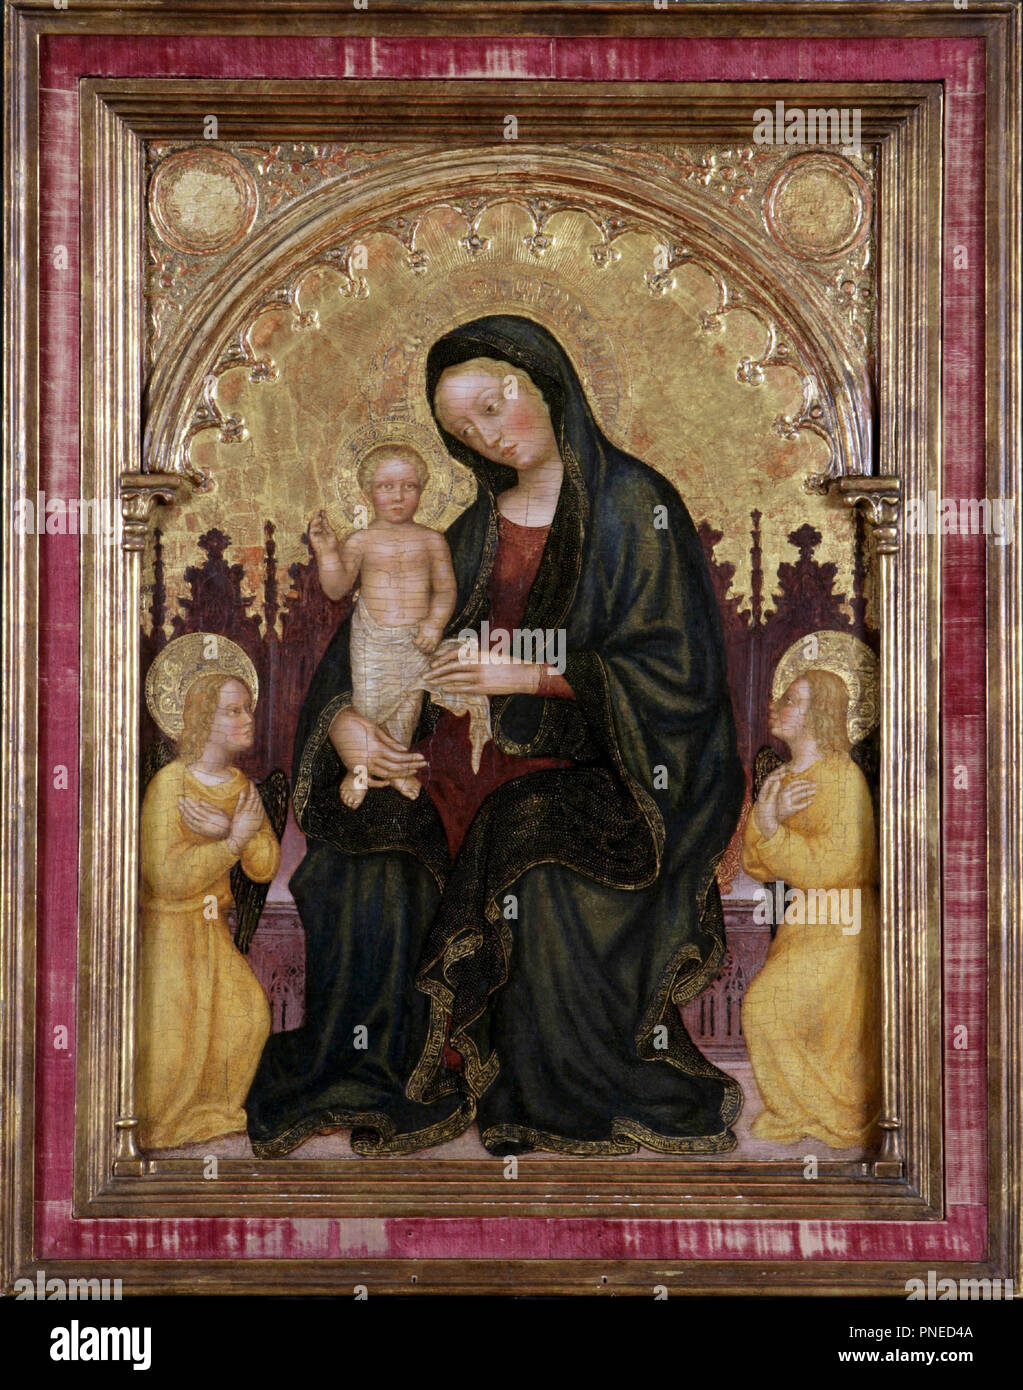 Enthroned Madonna and Child with Two Angels. Date/Period: 1410. Tempera on Panel. Author: GENTILE DA FABRIANO. Stock Photo